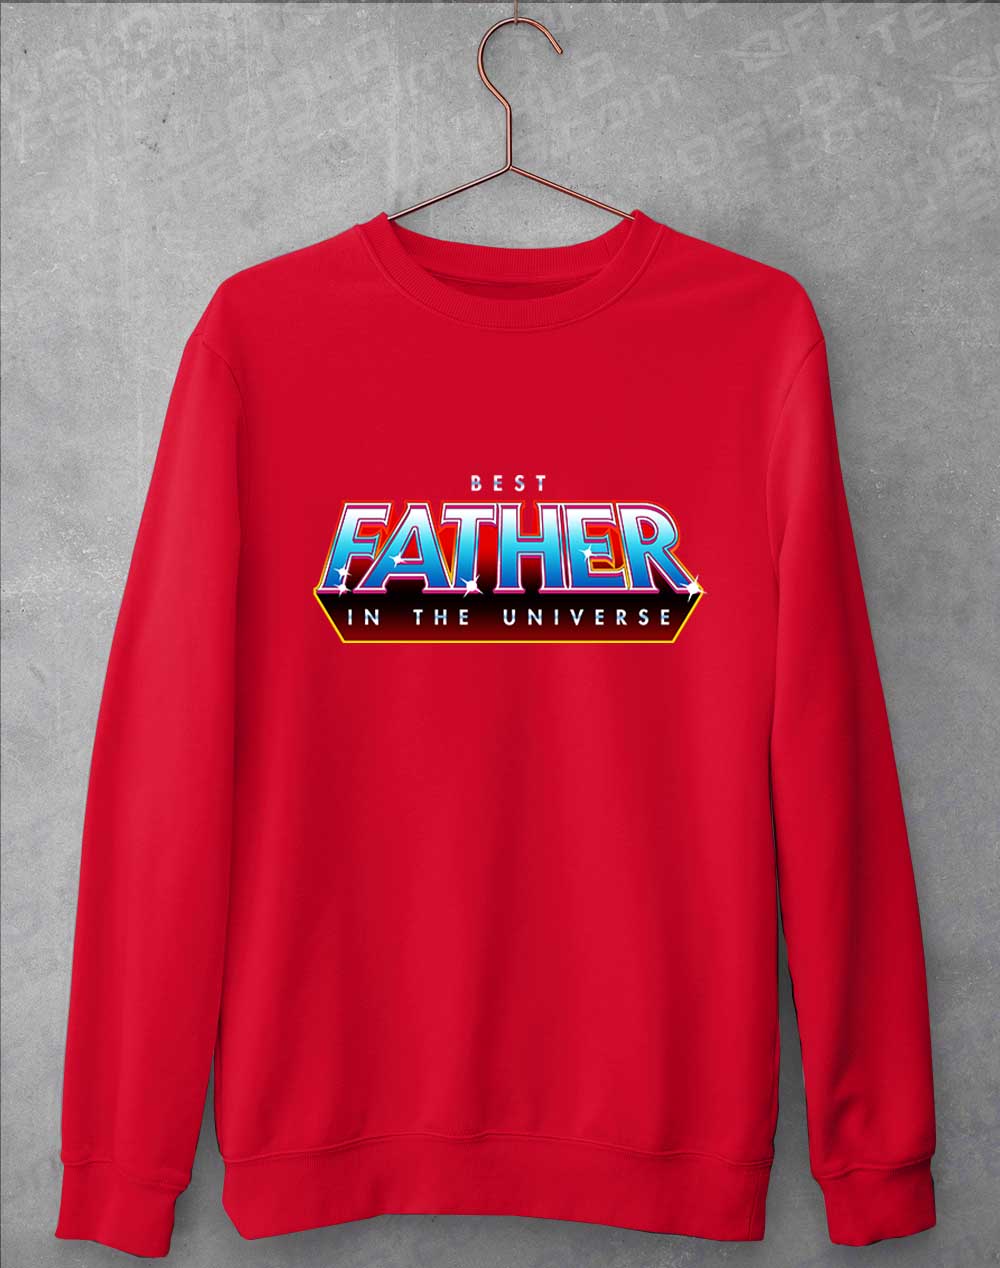 Fire Red - Best Father in the Universe Sweatshirt